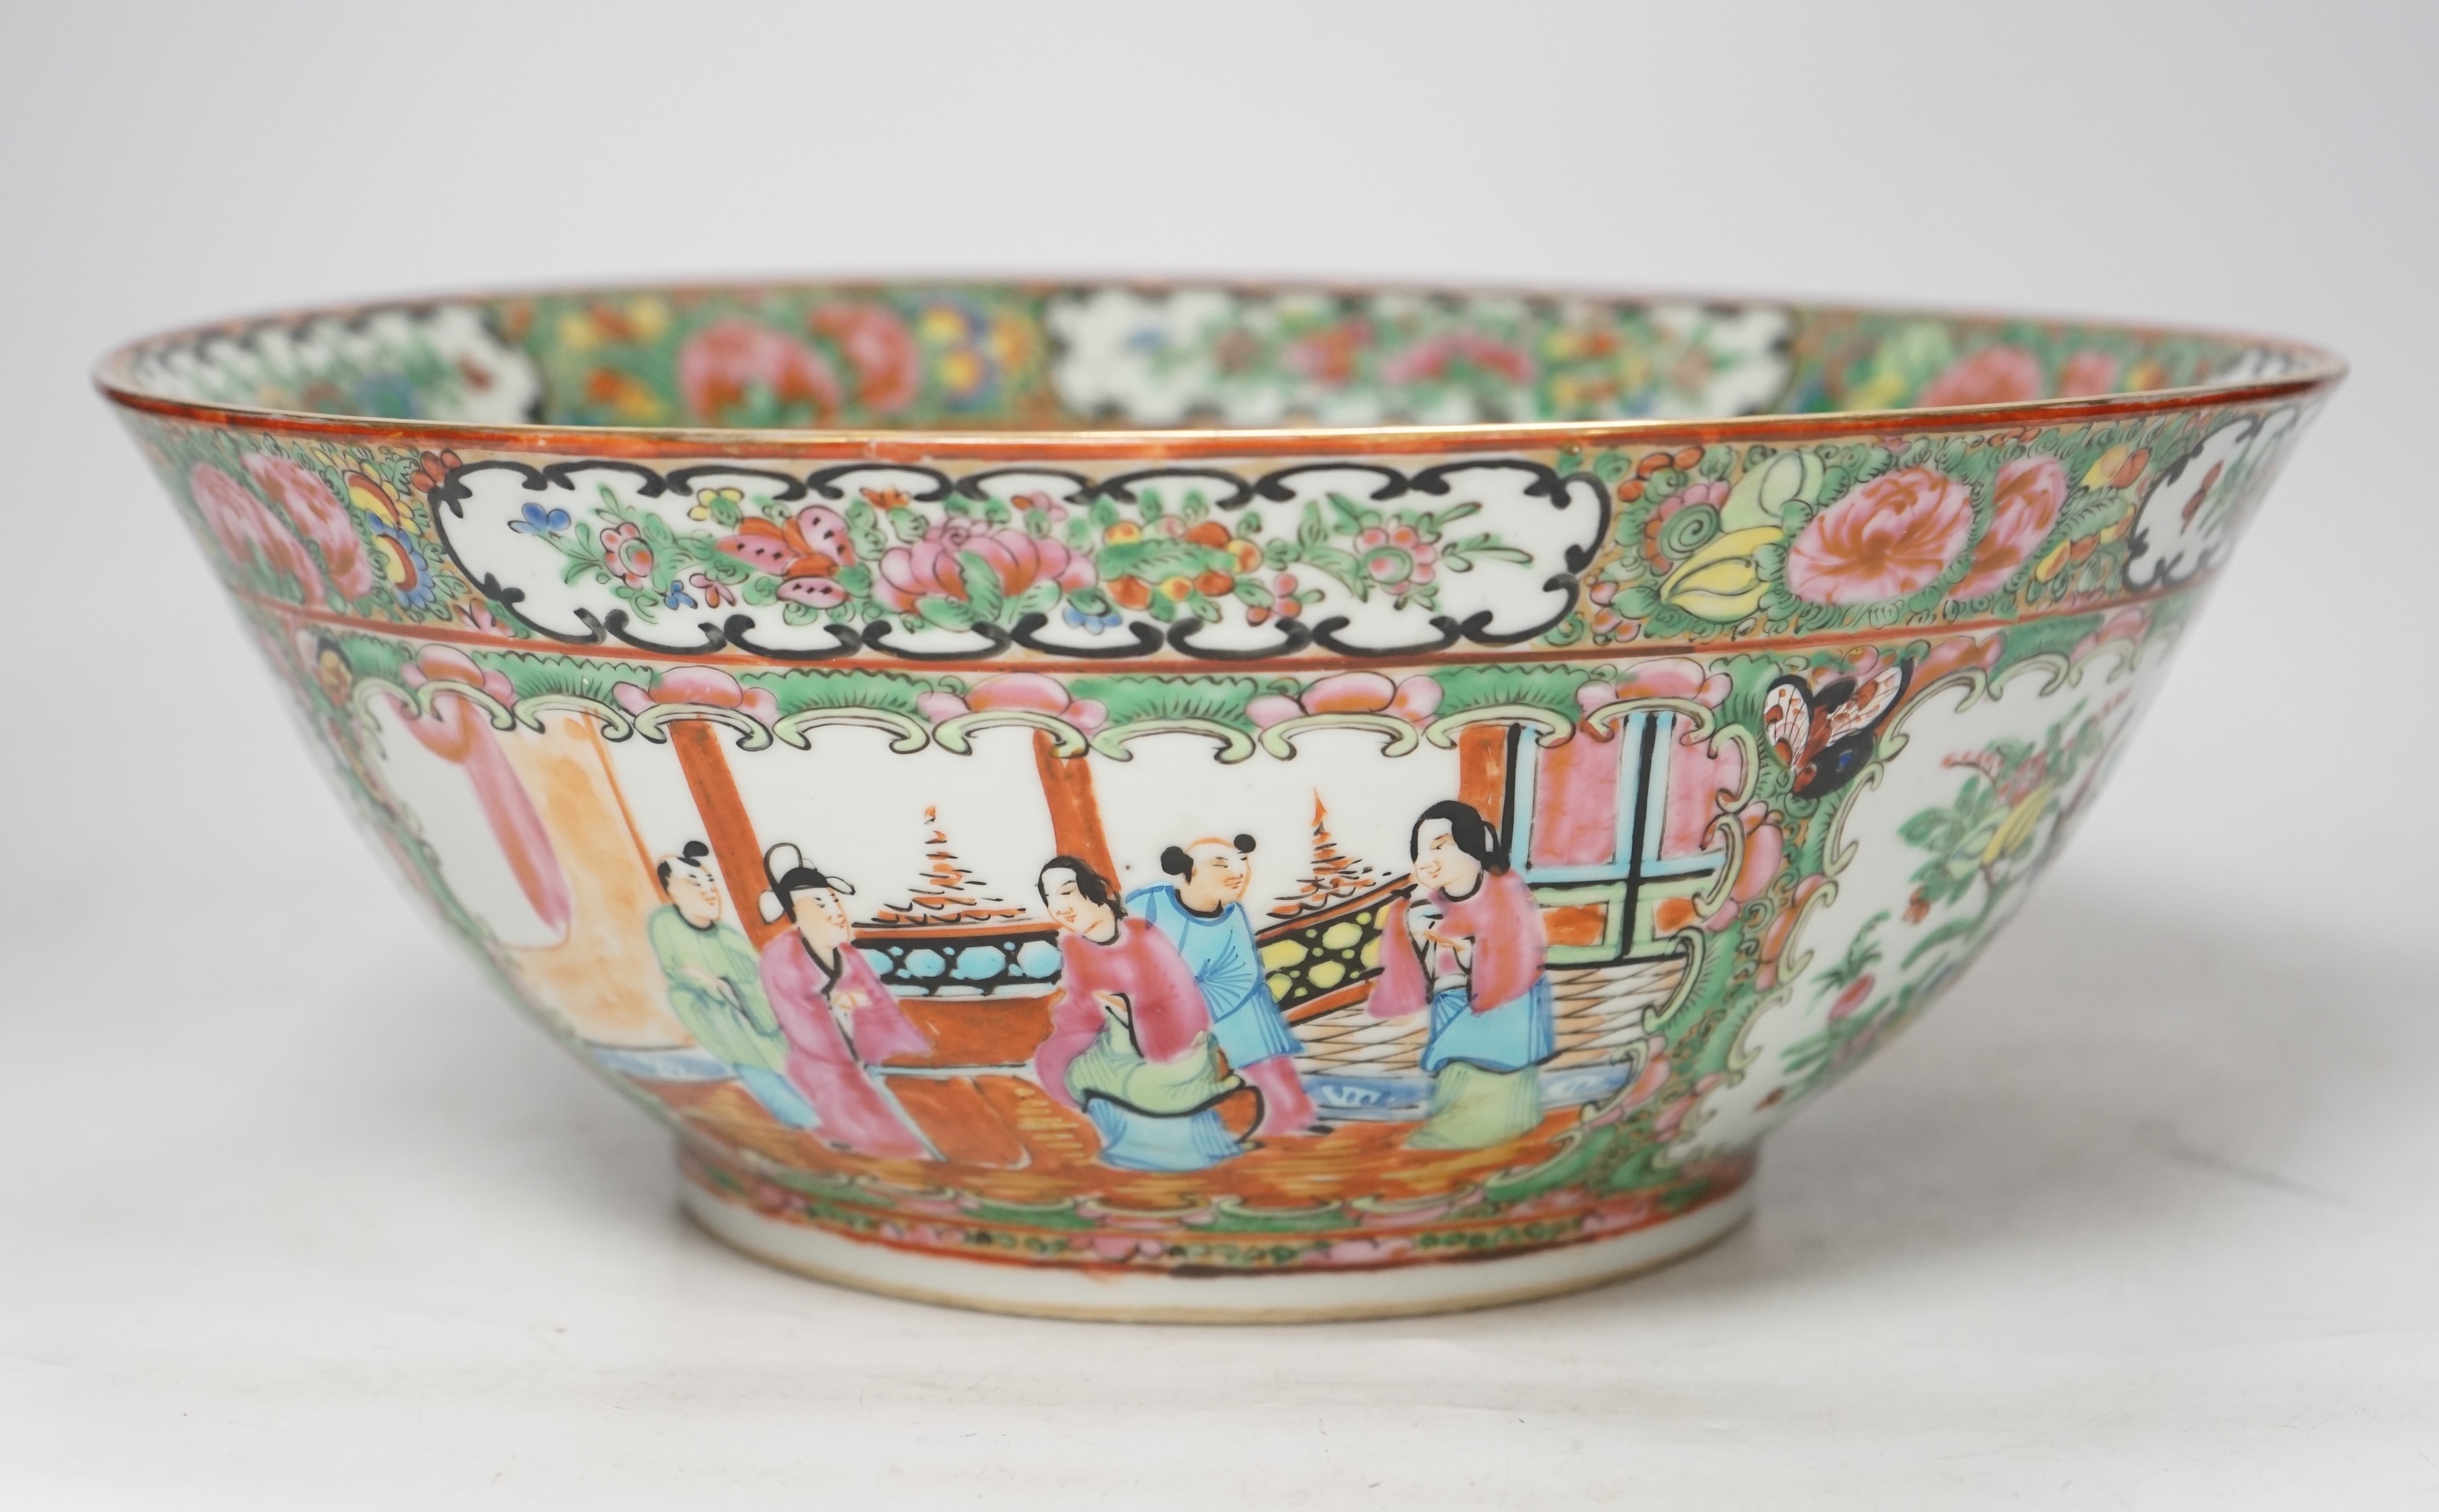 A 20th century Chinese Canton famille rose bowl, 30cm diameter. Condition - good